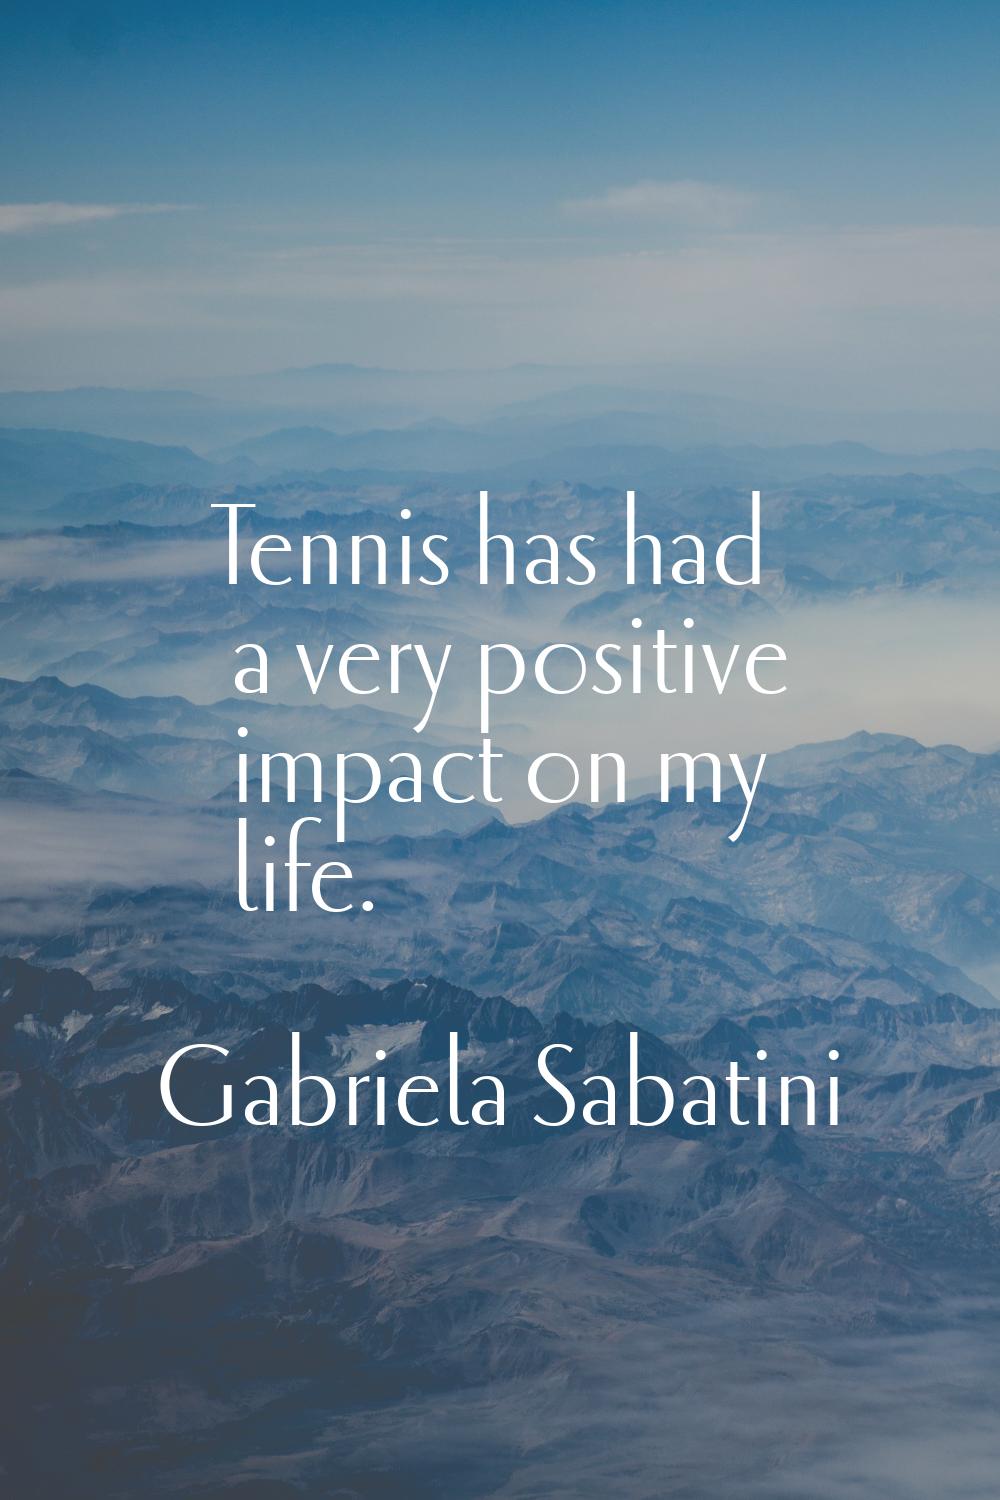 Tennis has had a very positive impact on my life.